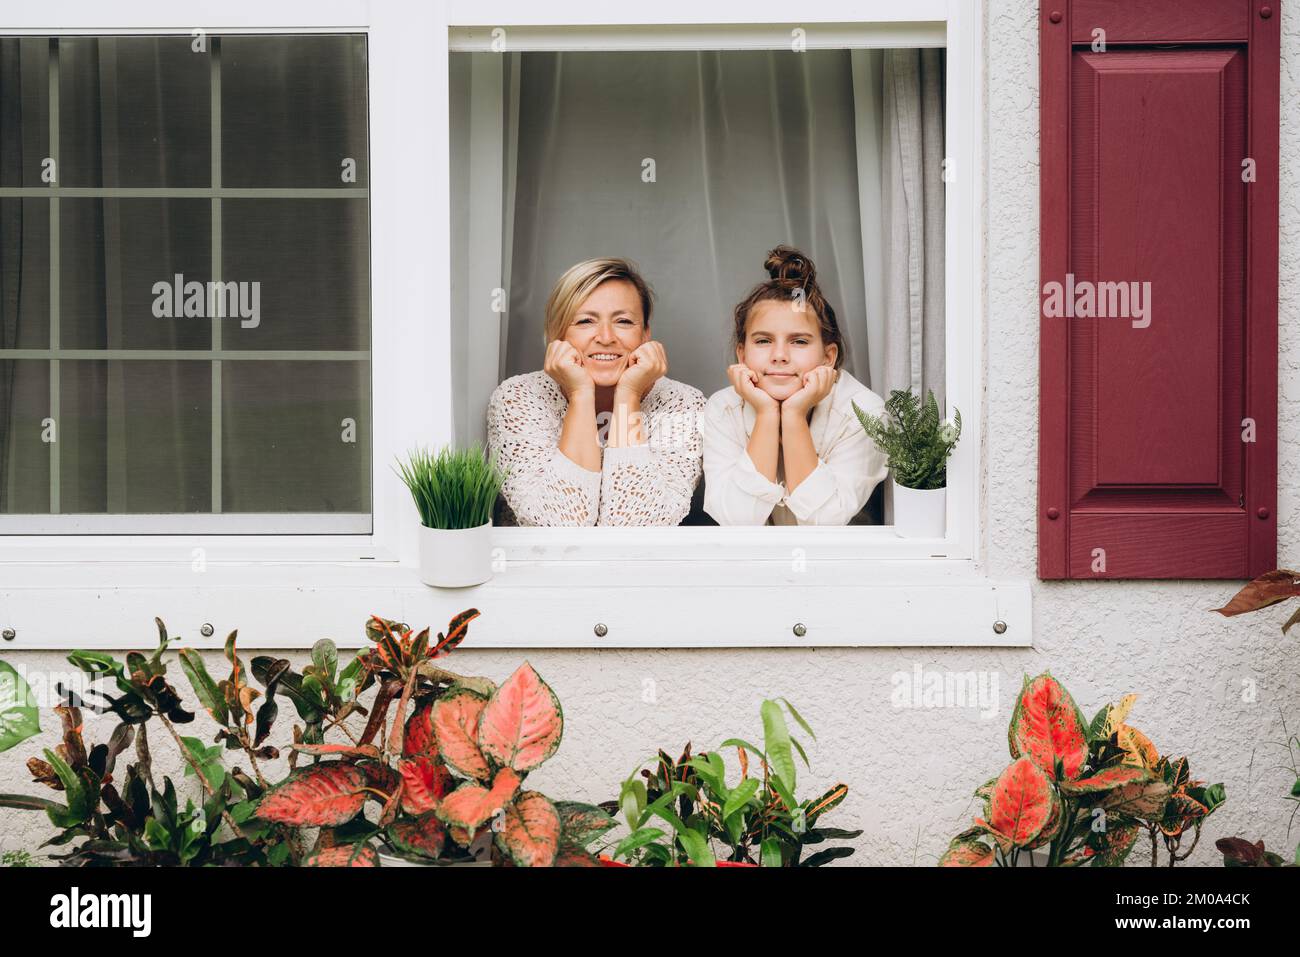 Smiling Mother and daughter in the window looking into the garden Stock Photo